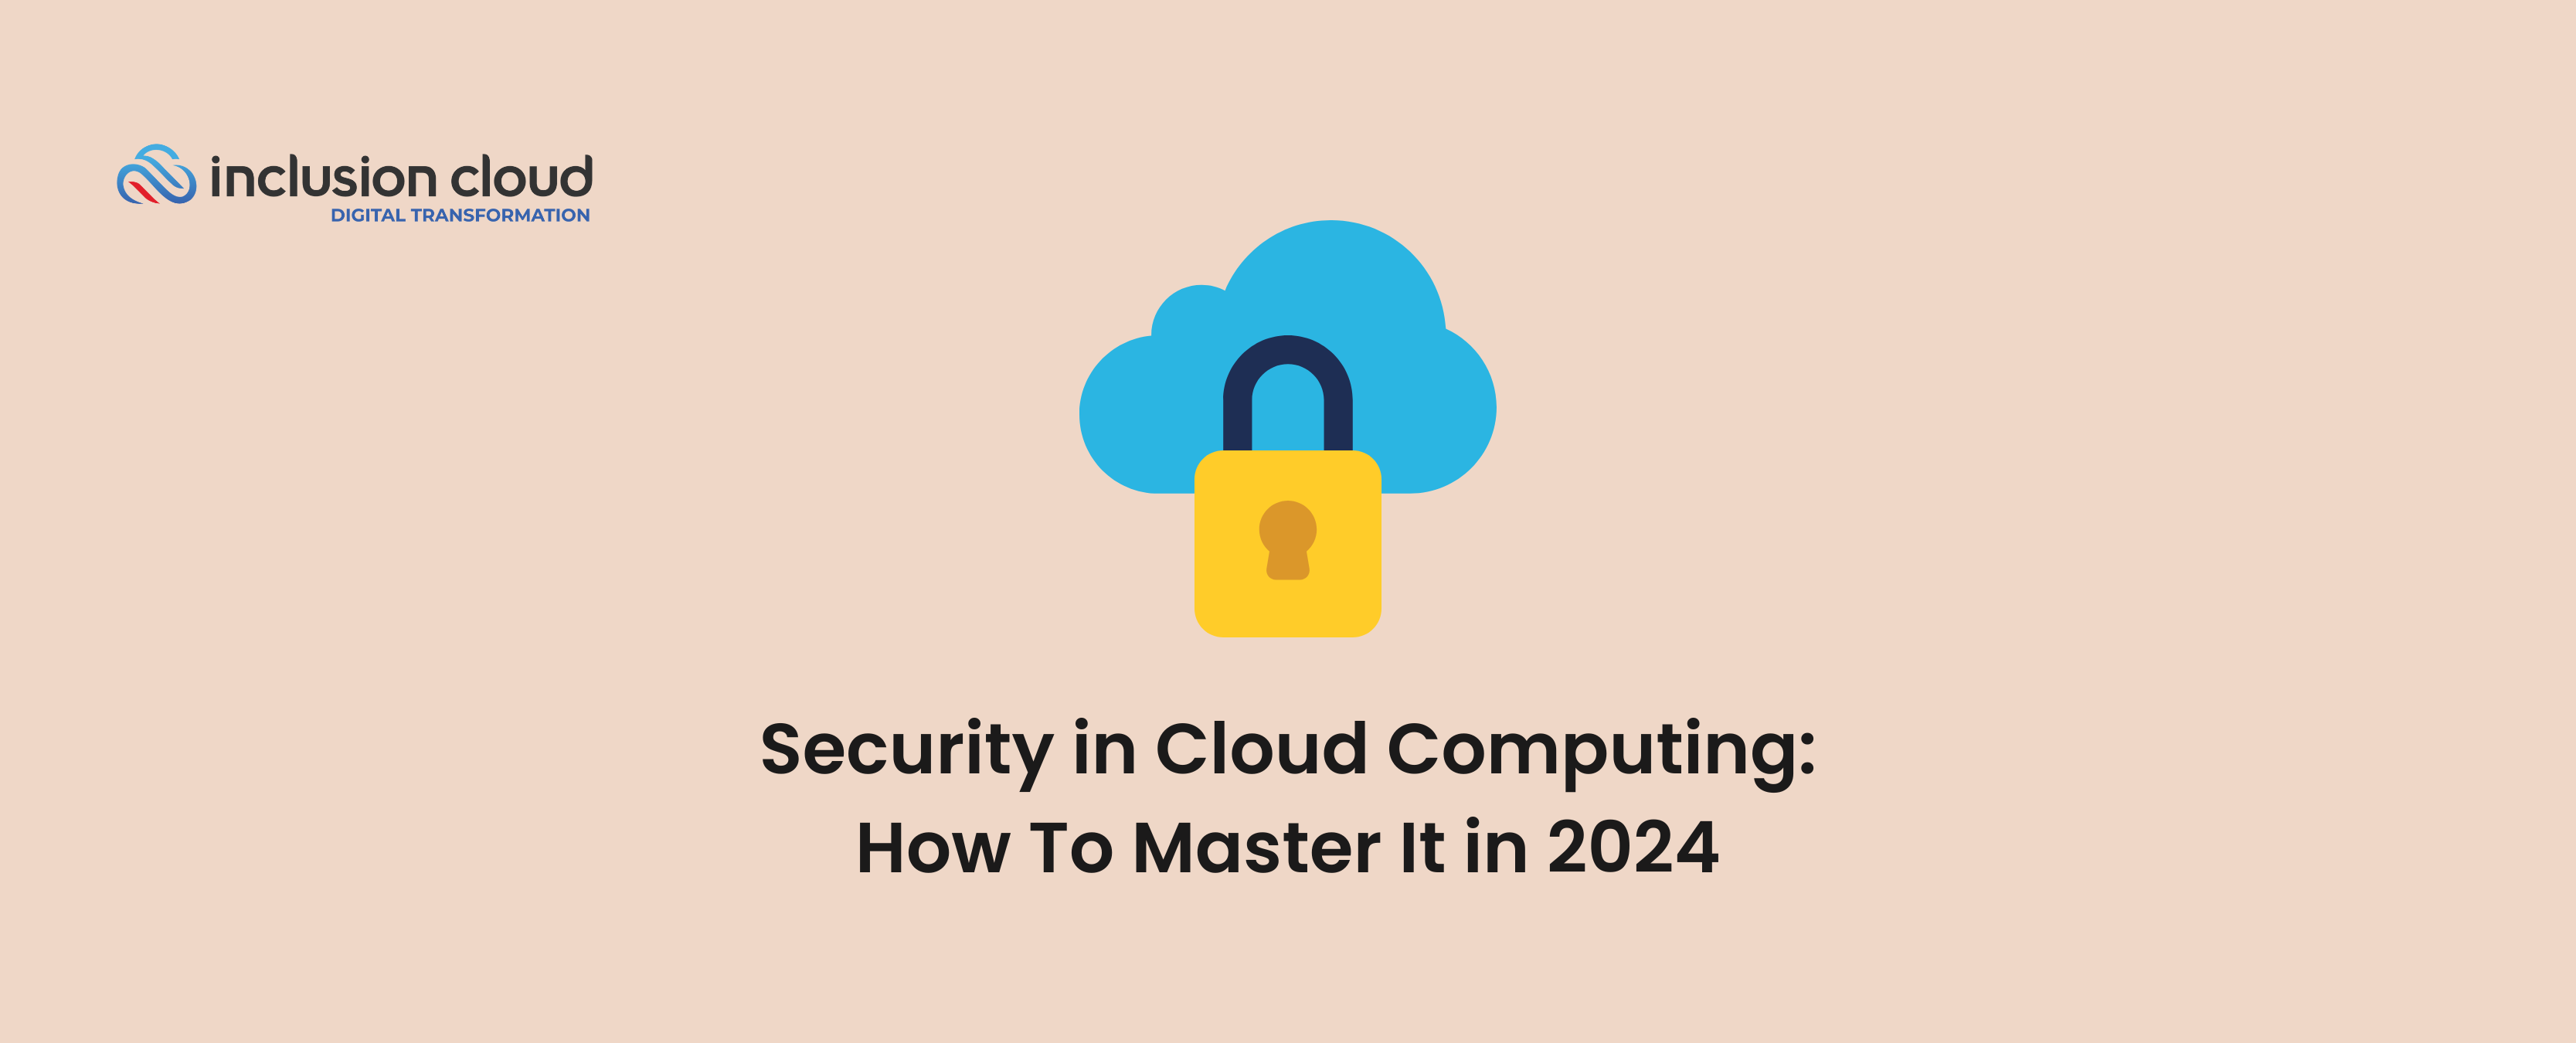 Security in Cloud Computing How To Master It in 2024